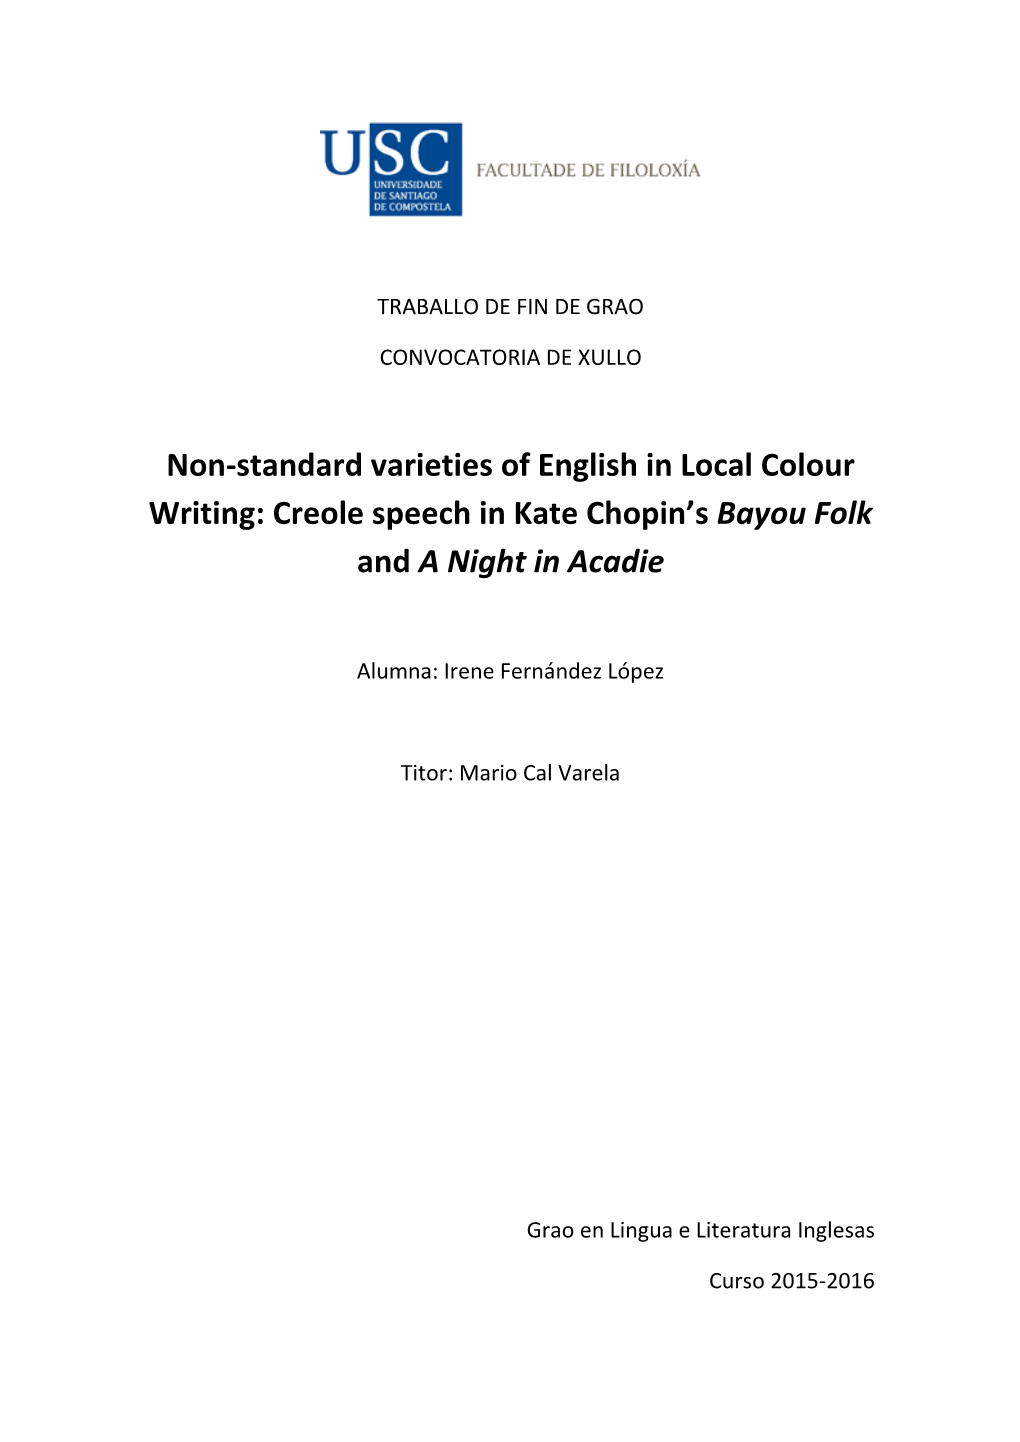 Non-Standard Varieties of English in Local Colour Writing: Creole Speech in Kate Chopin's Bayou Folk and a Night in Acadie